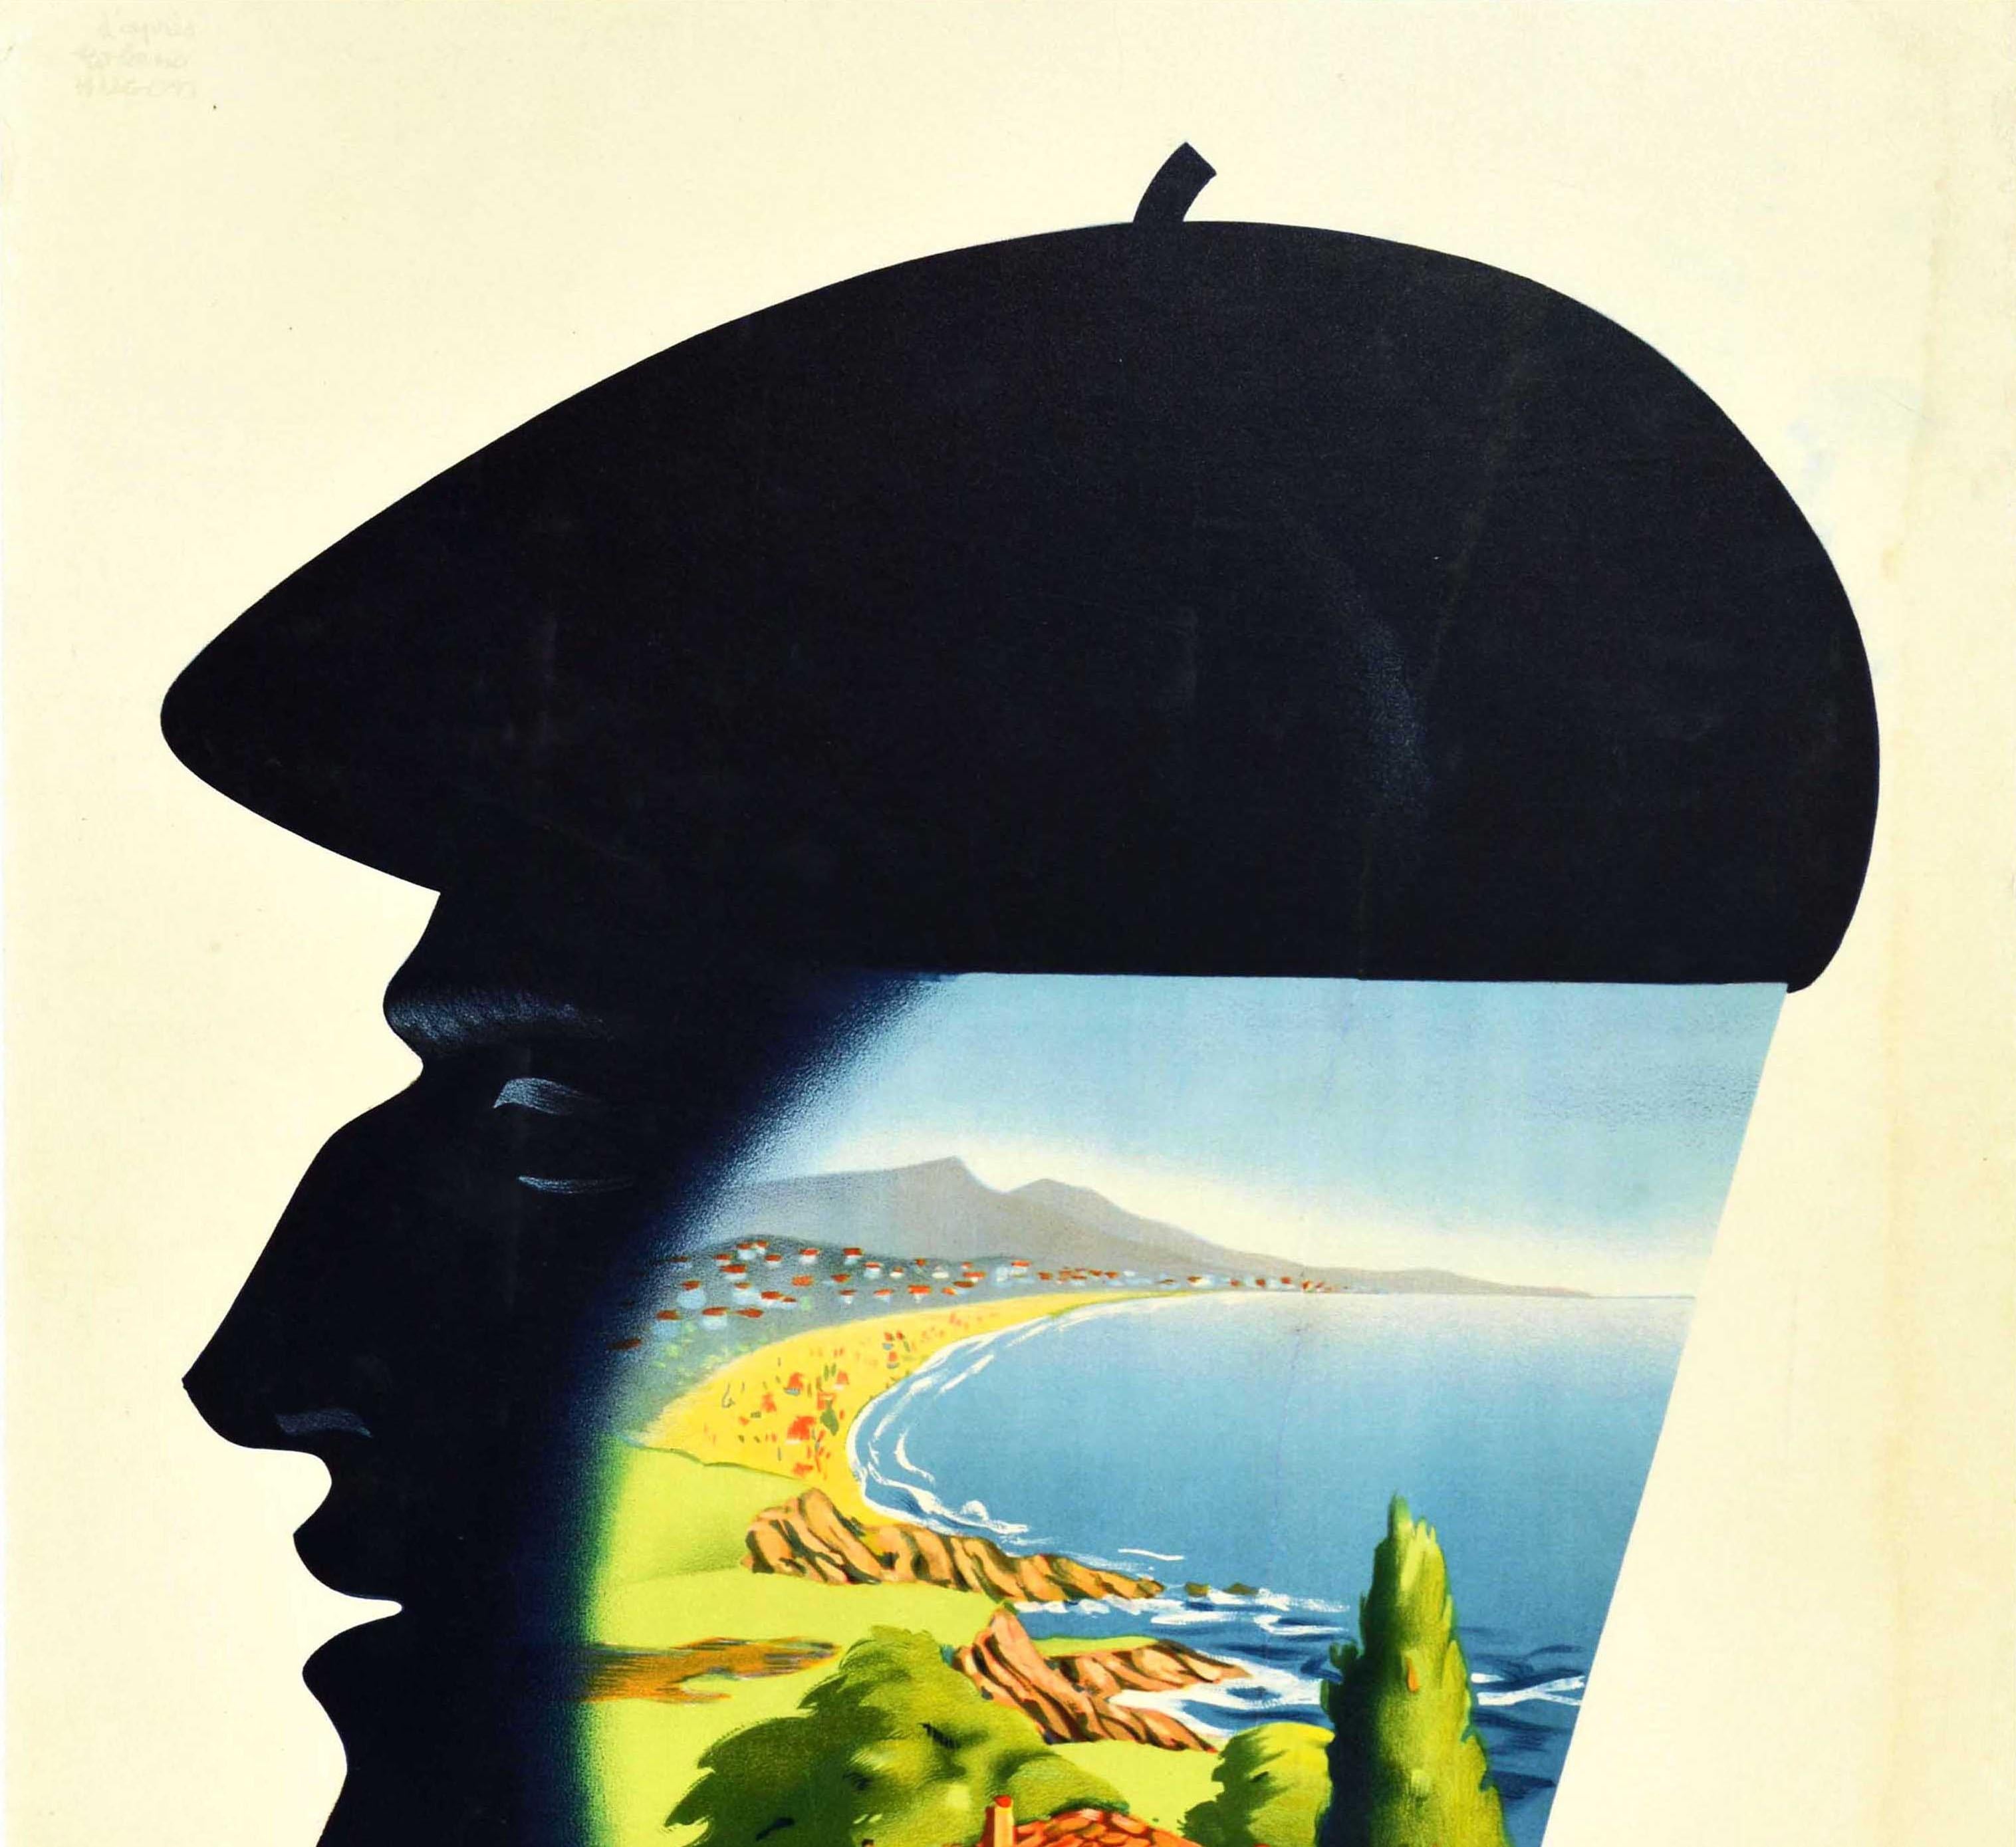 Original vintage SNCF railway travel poster for the Basque Coast - Cote Basque Societe Nationale des Chemins de Fer Francais - featuring a great Art Deco design depicting a scenic view of railway lines above the bay with a house between trees in the